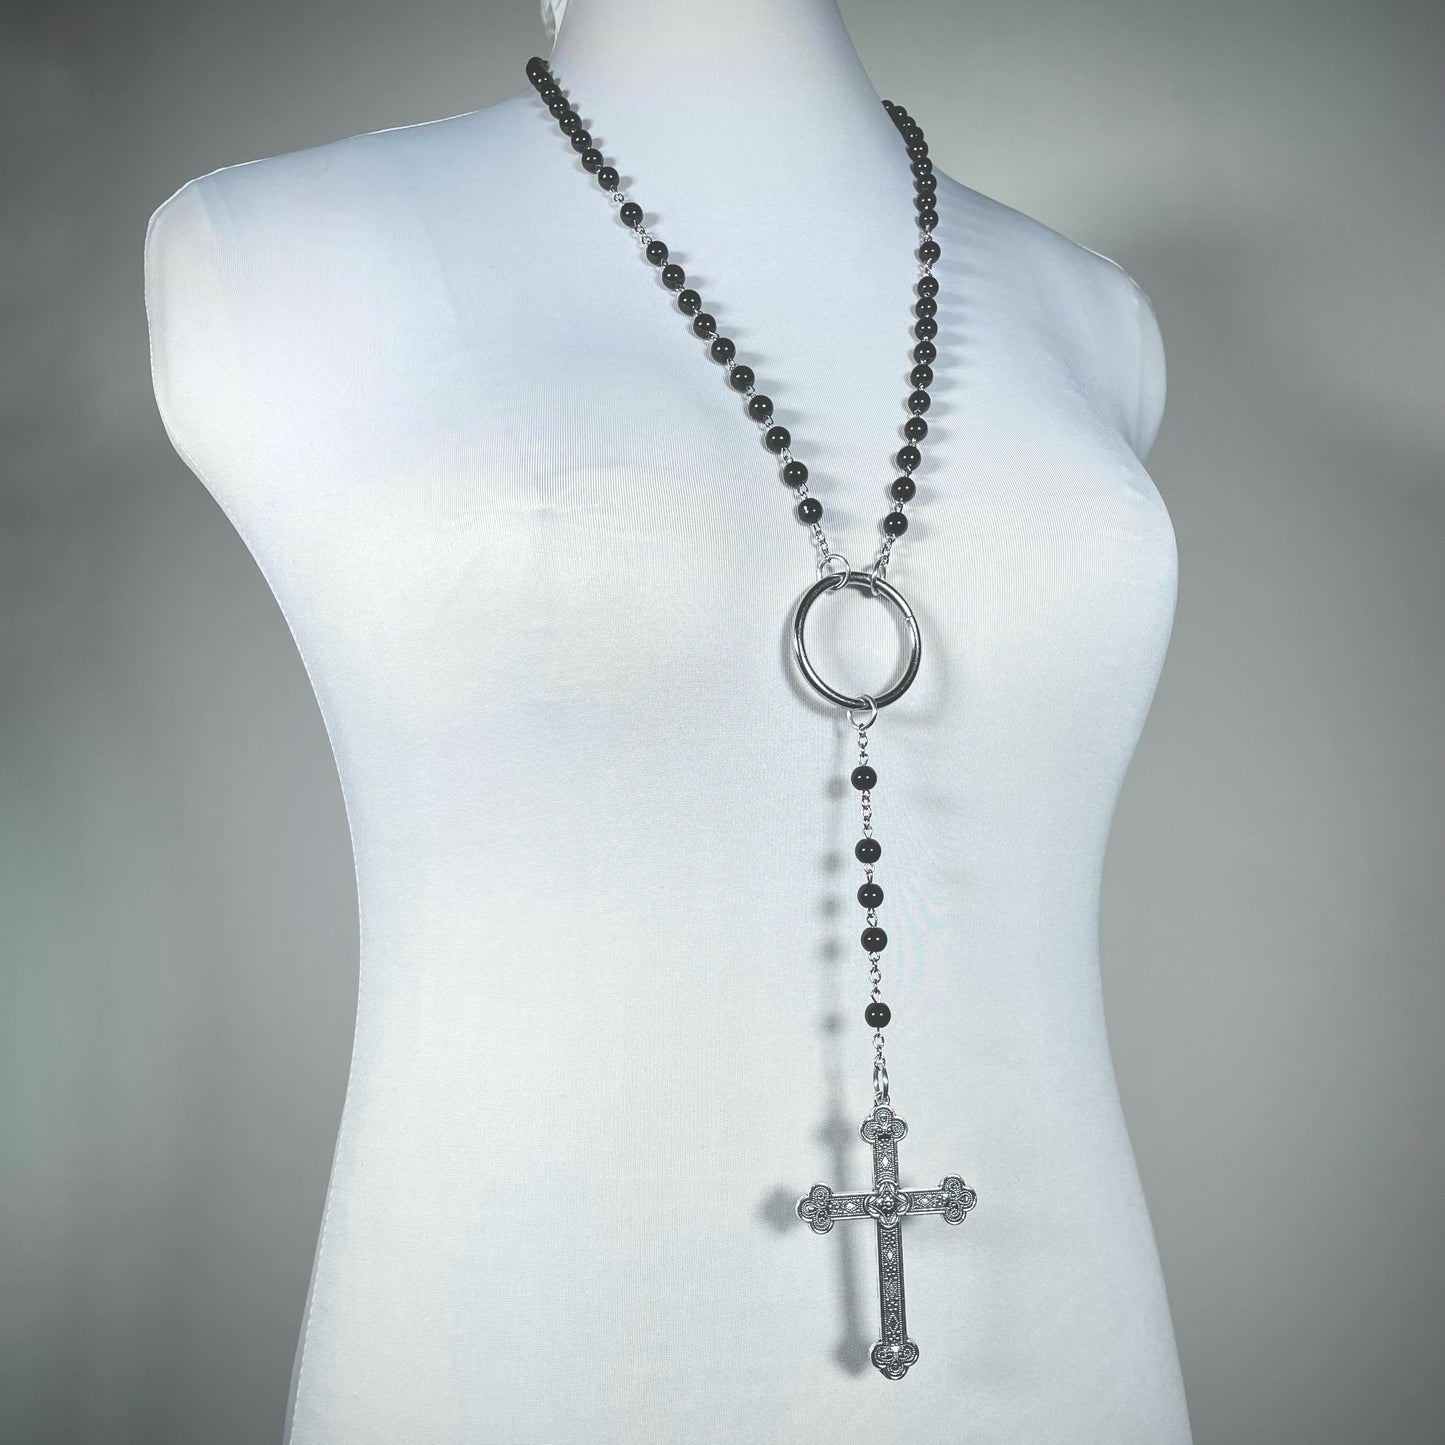 Stainless steel Religious rosary necklace